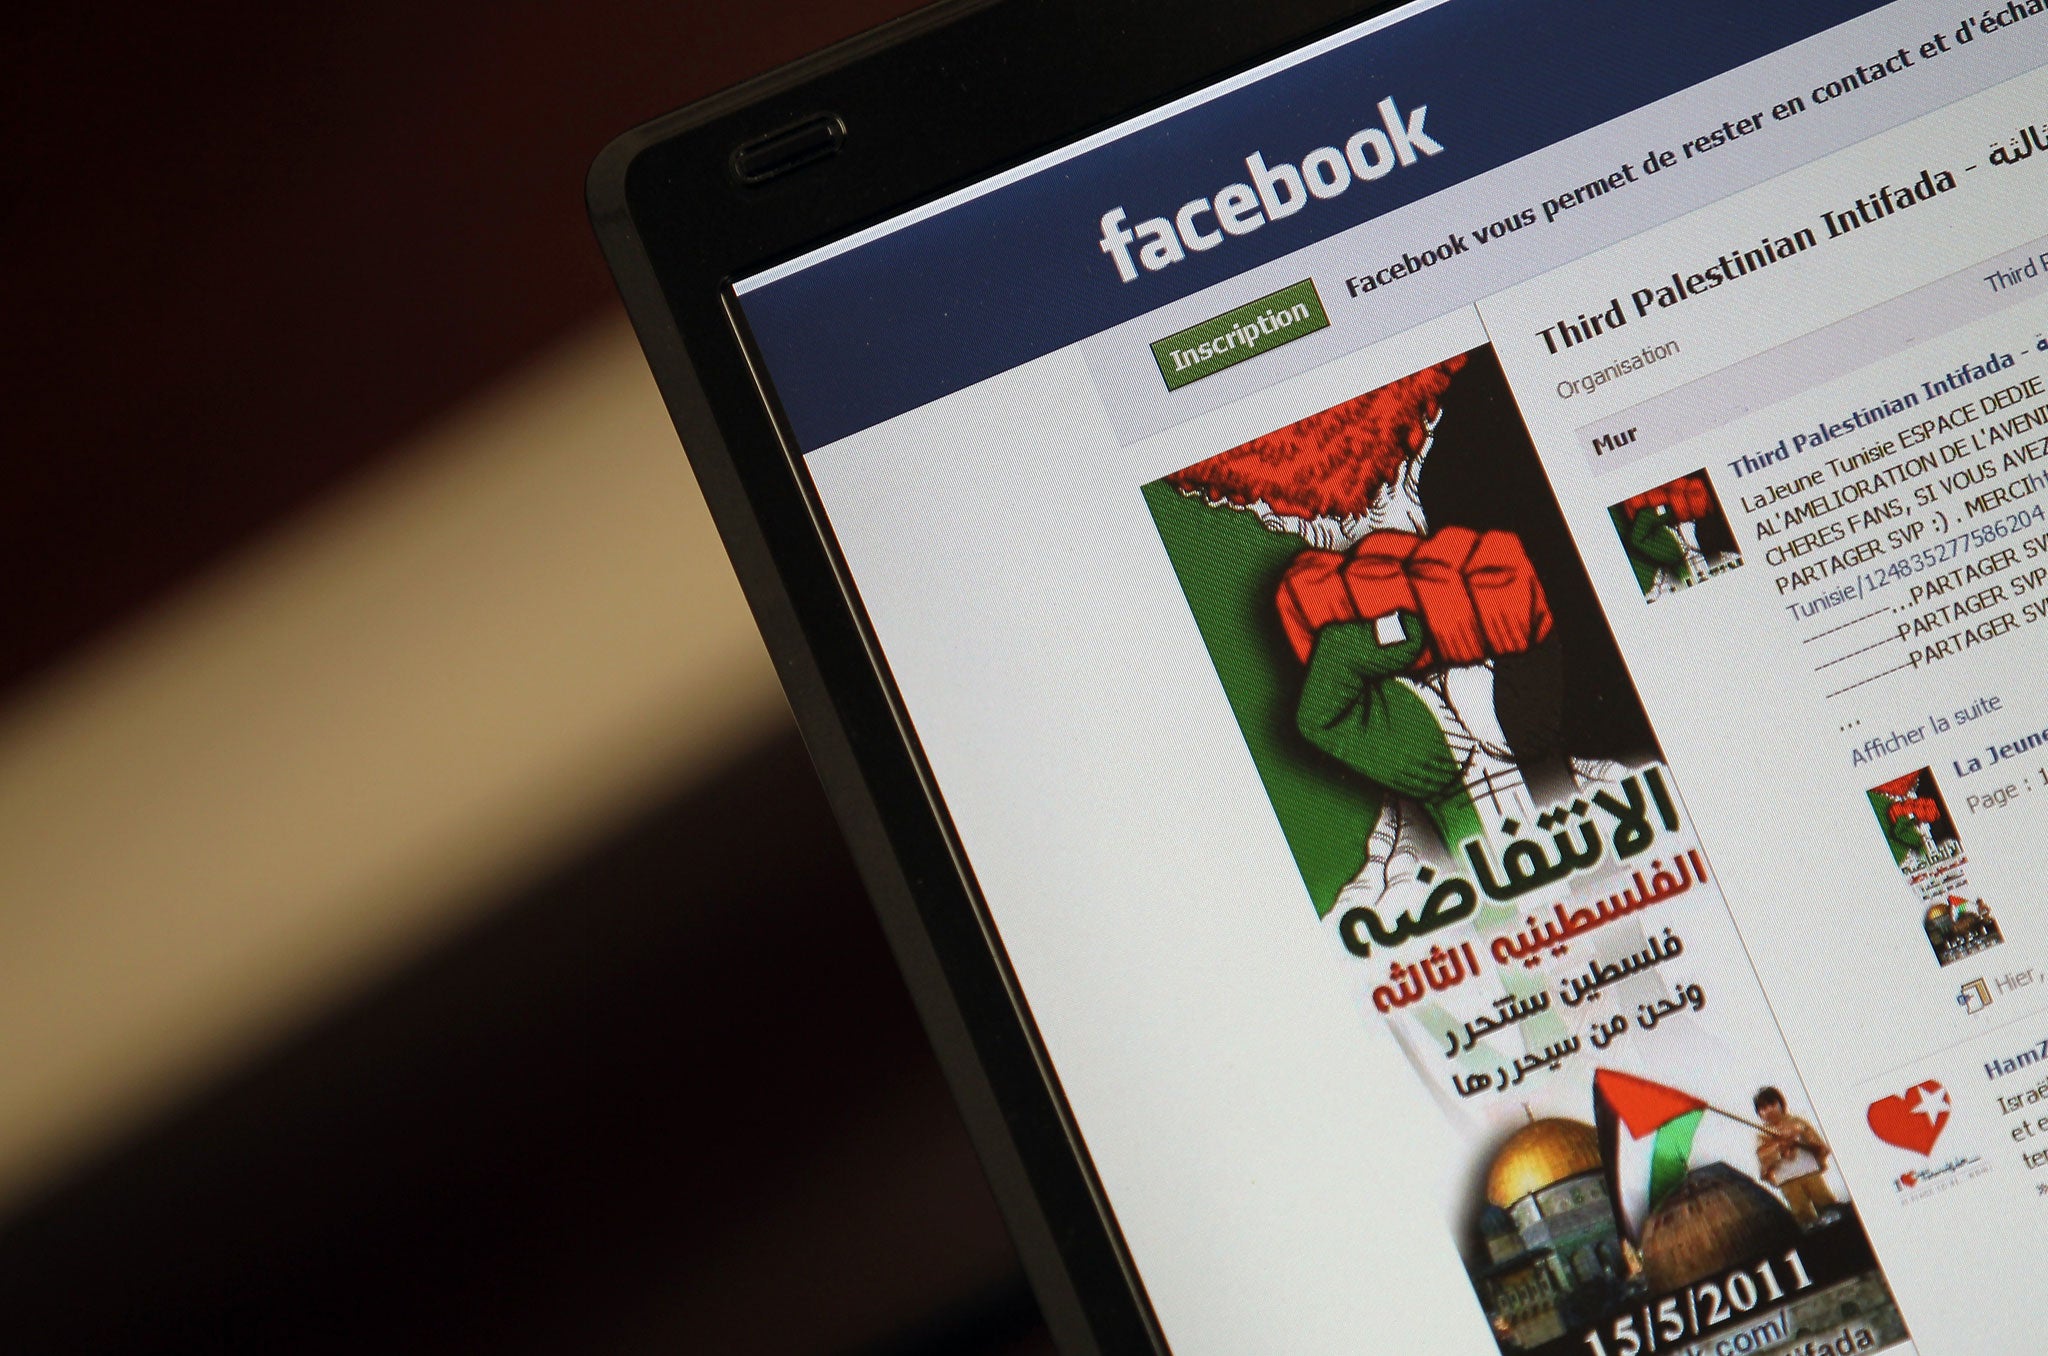 A view of a Facebook page taken in Gaza City, on March 31, 2011. Attempts by Facebook to shut down a 'Third Intifada' page backfired, with over 7,000 Palestinians immediately signing up for three new copycat pages.